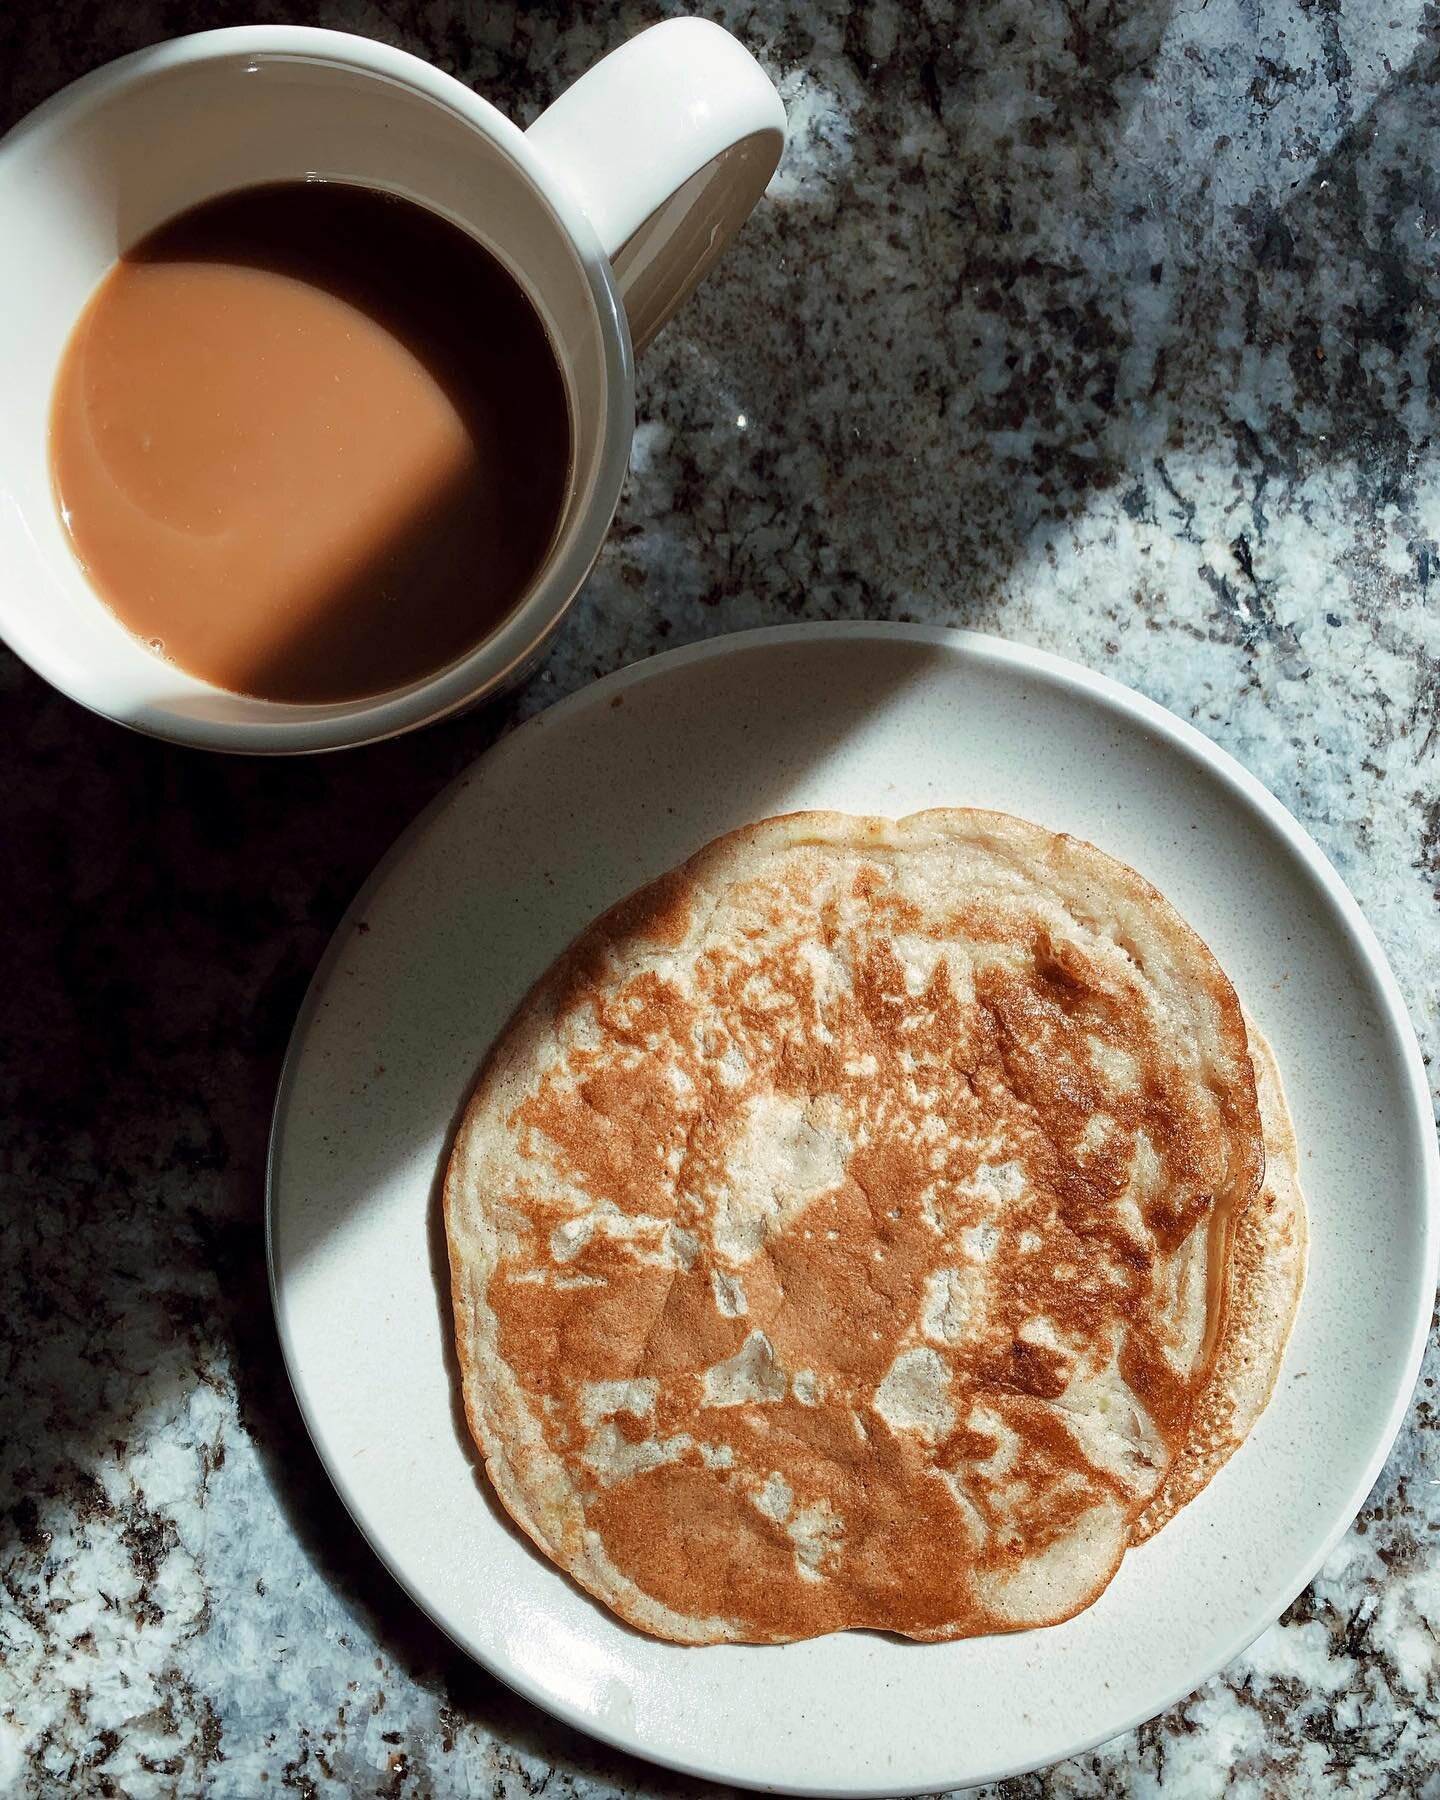 The simplest breakfast snd easy to share w the baby 🥞 I smash one banana and add to the batter, as well as cinnamon, vanilla and flax powder. I also like to make my batter thin by adding more liquid(I use almond milk) for a crepe-like pancake. I rea